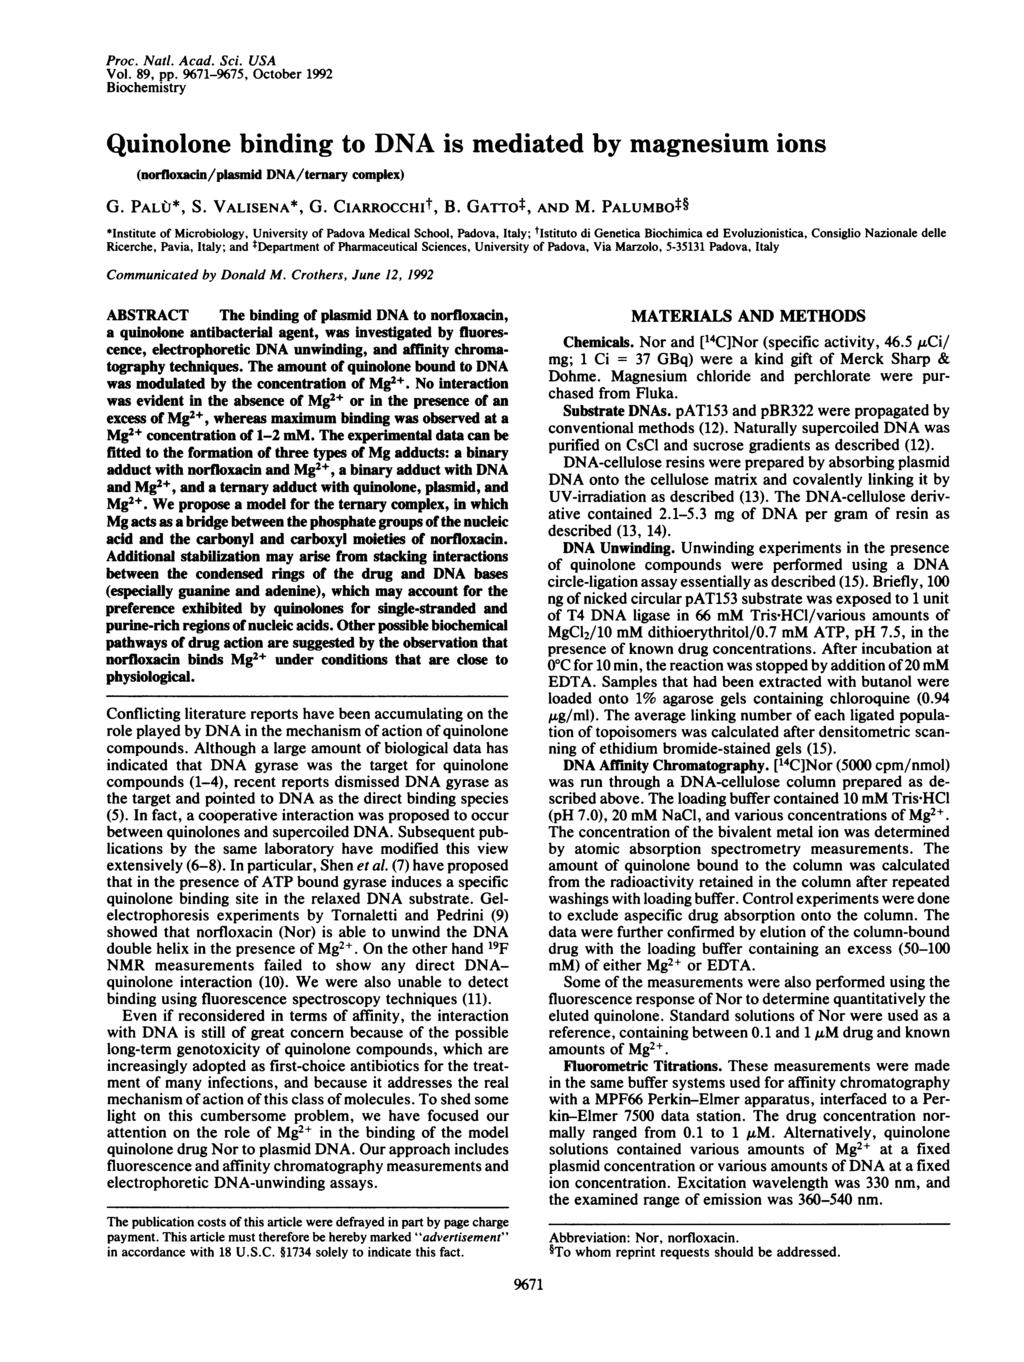 Proc. Natl. Acad. Sci. USA Vol. 89, pp. 9671-9675, October 1992 Biochemistry Quinolone binding to DNA is mediated by magnesium ions (norfloxacin/plasmid DNA/ternary complex) G. PALLJ*, S.